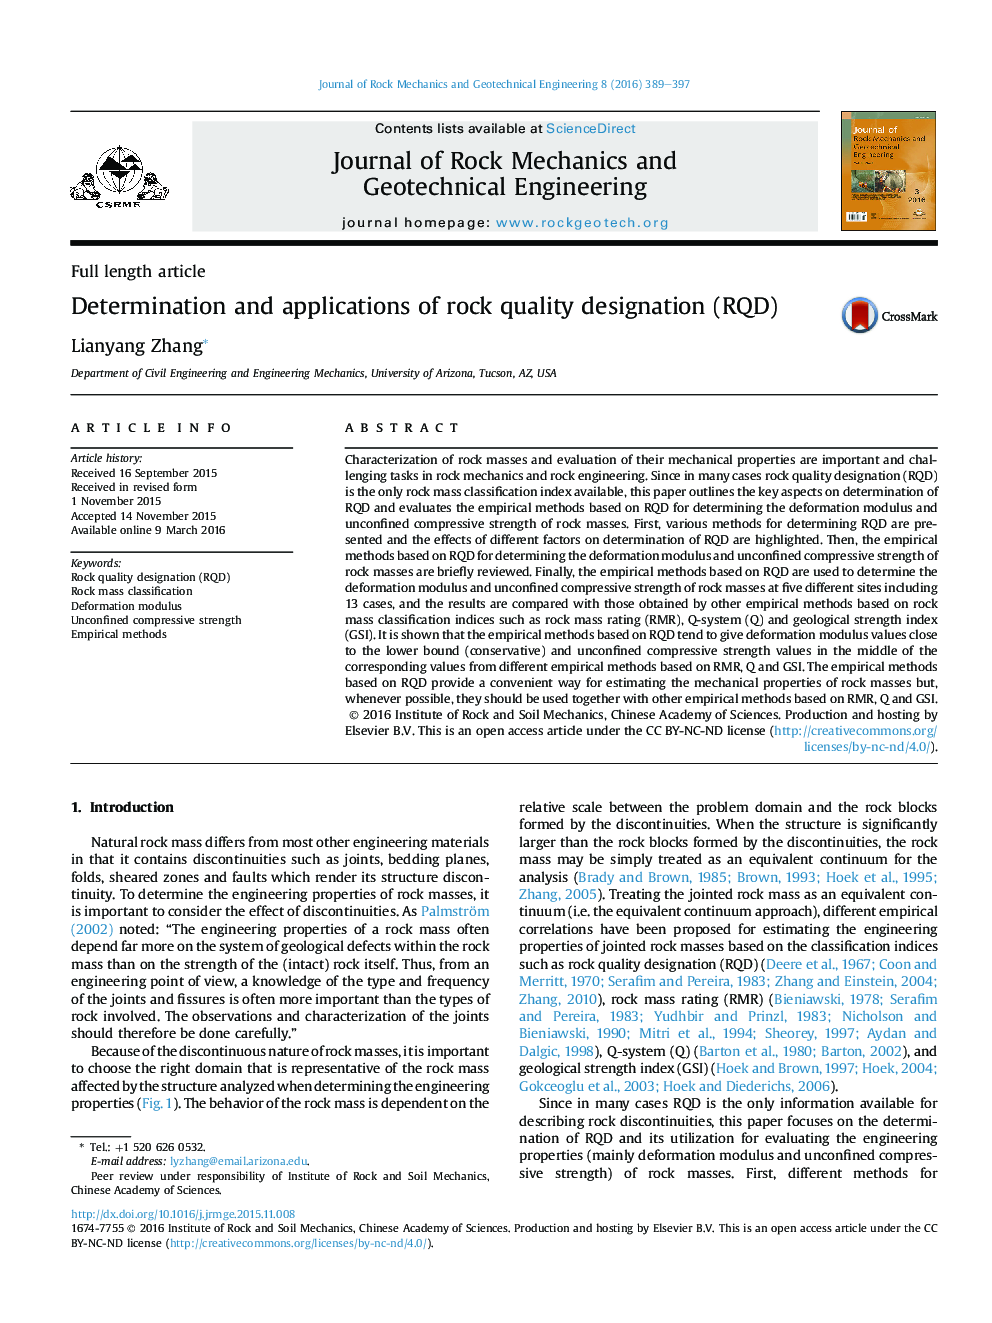 Determination and applications of rock quality designation (RQD) 